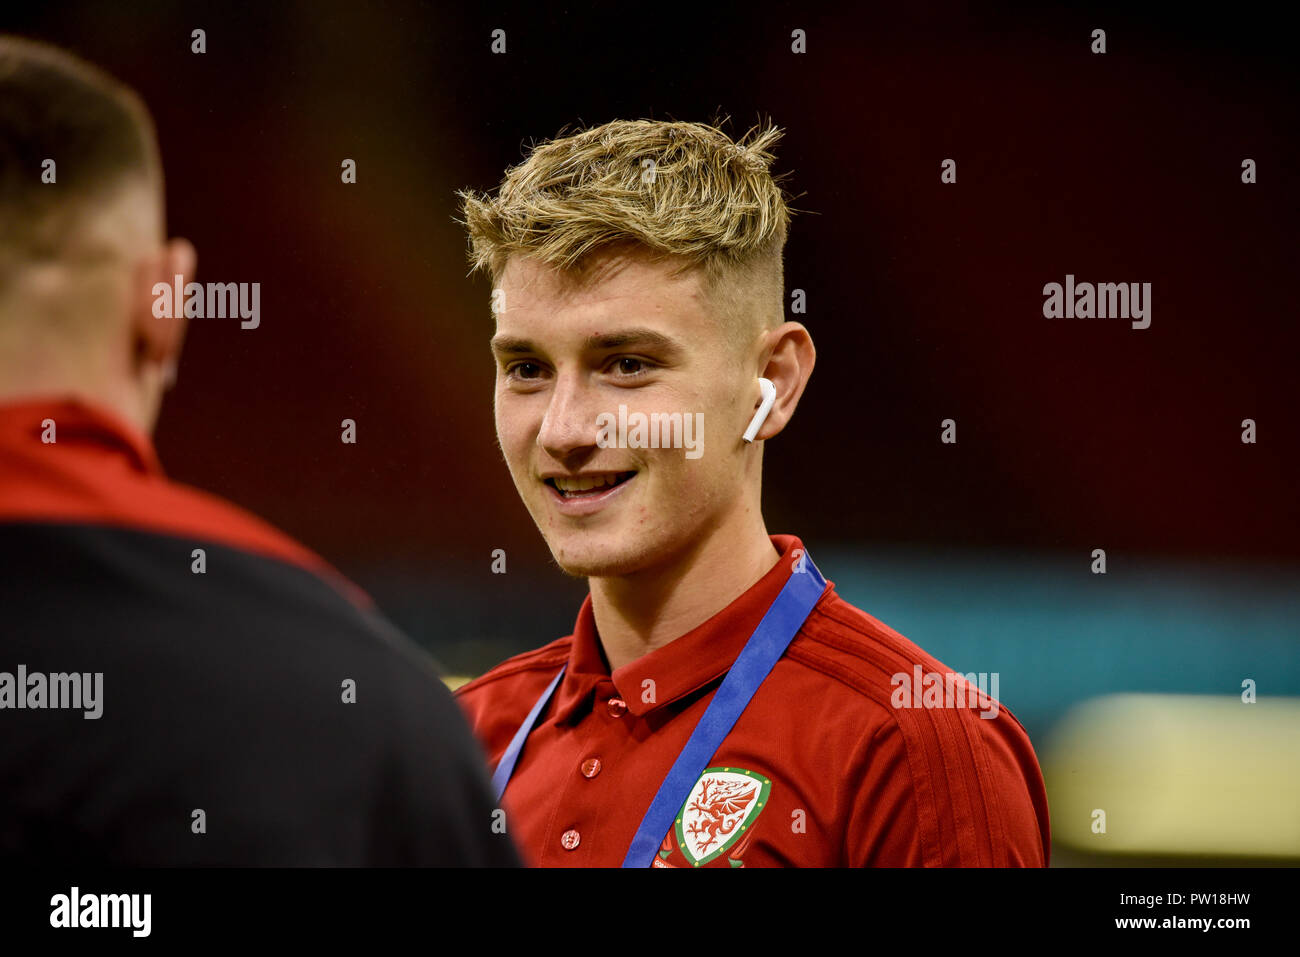 Cardiff, UK. 11th Oct 2018. Wales v Spain, International Football Friendly, National Stadium of Wales, 11/10/18: Wales' David Brooks Credit: Andrew Dowling/Influential Photography/Alamy Live News Stock Photo